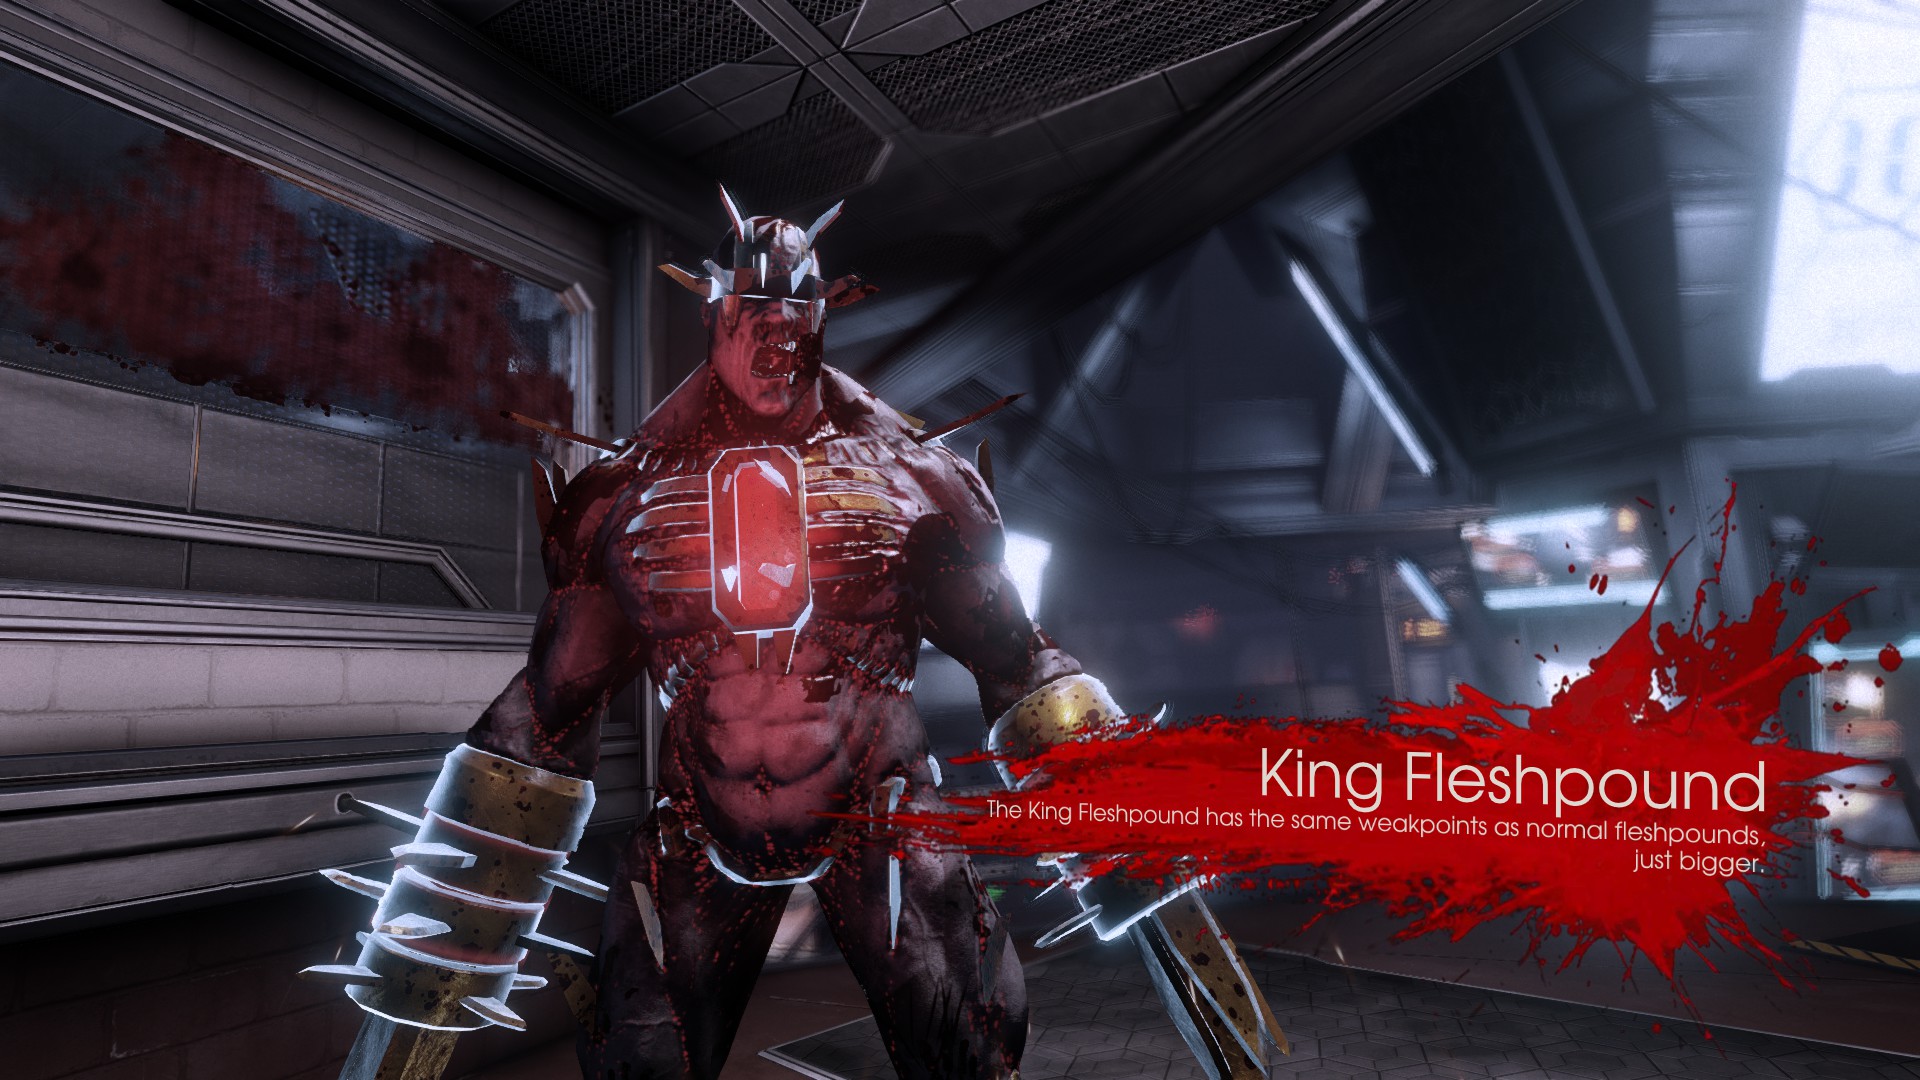 All Killing Floor 2 Enemies And Bosses And How To Deal With Them Images, Photos, Reviews